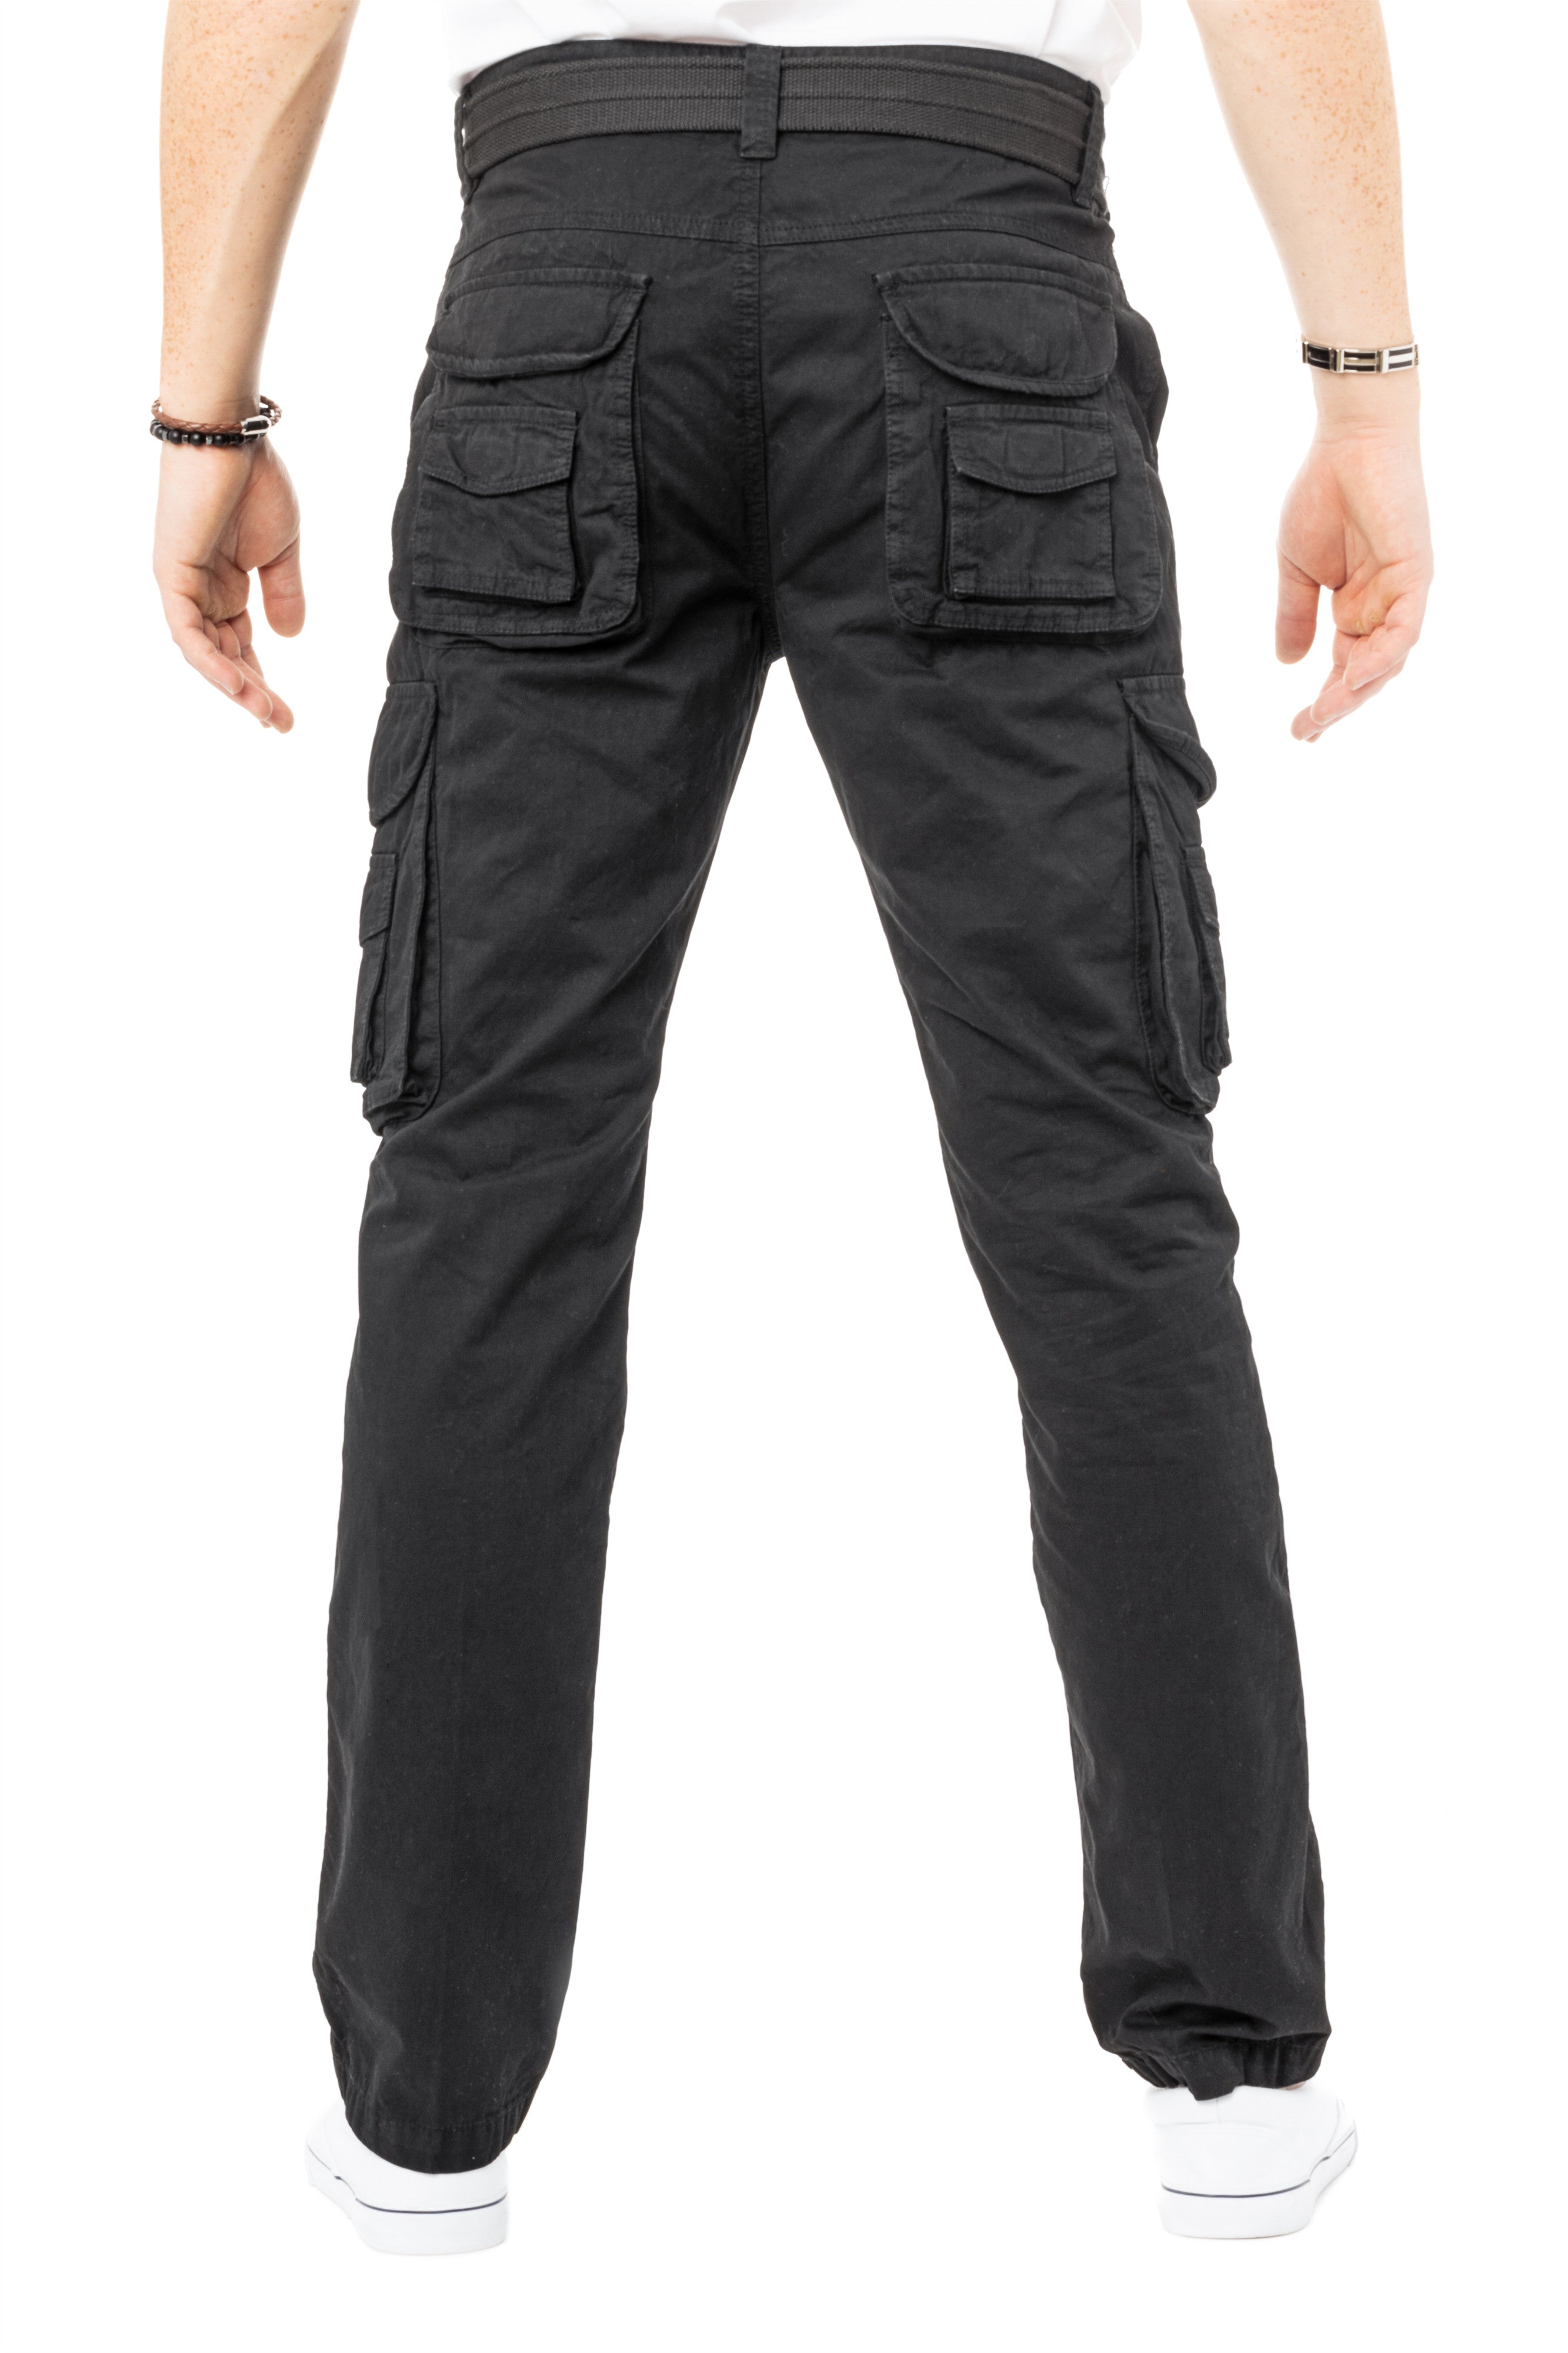 Relaxed Fit Cargo trousers - Dark green - Men | H&M IN